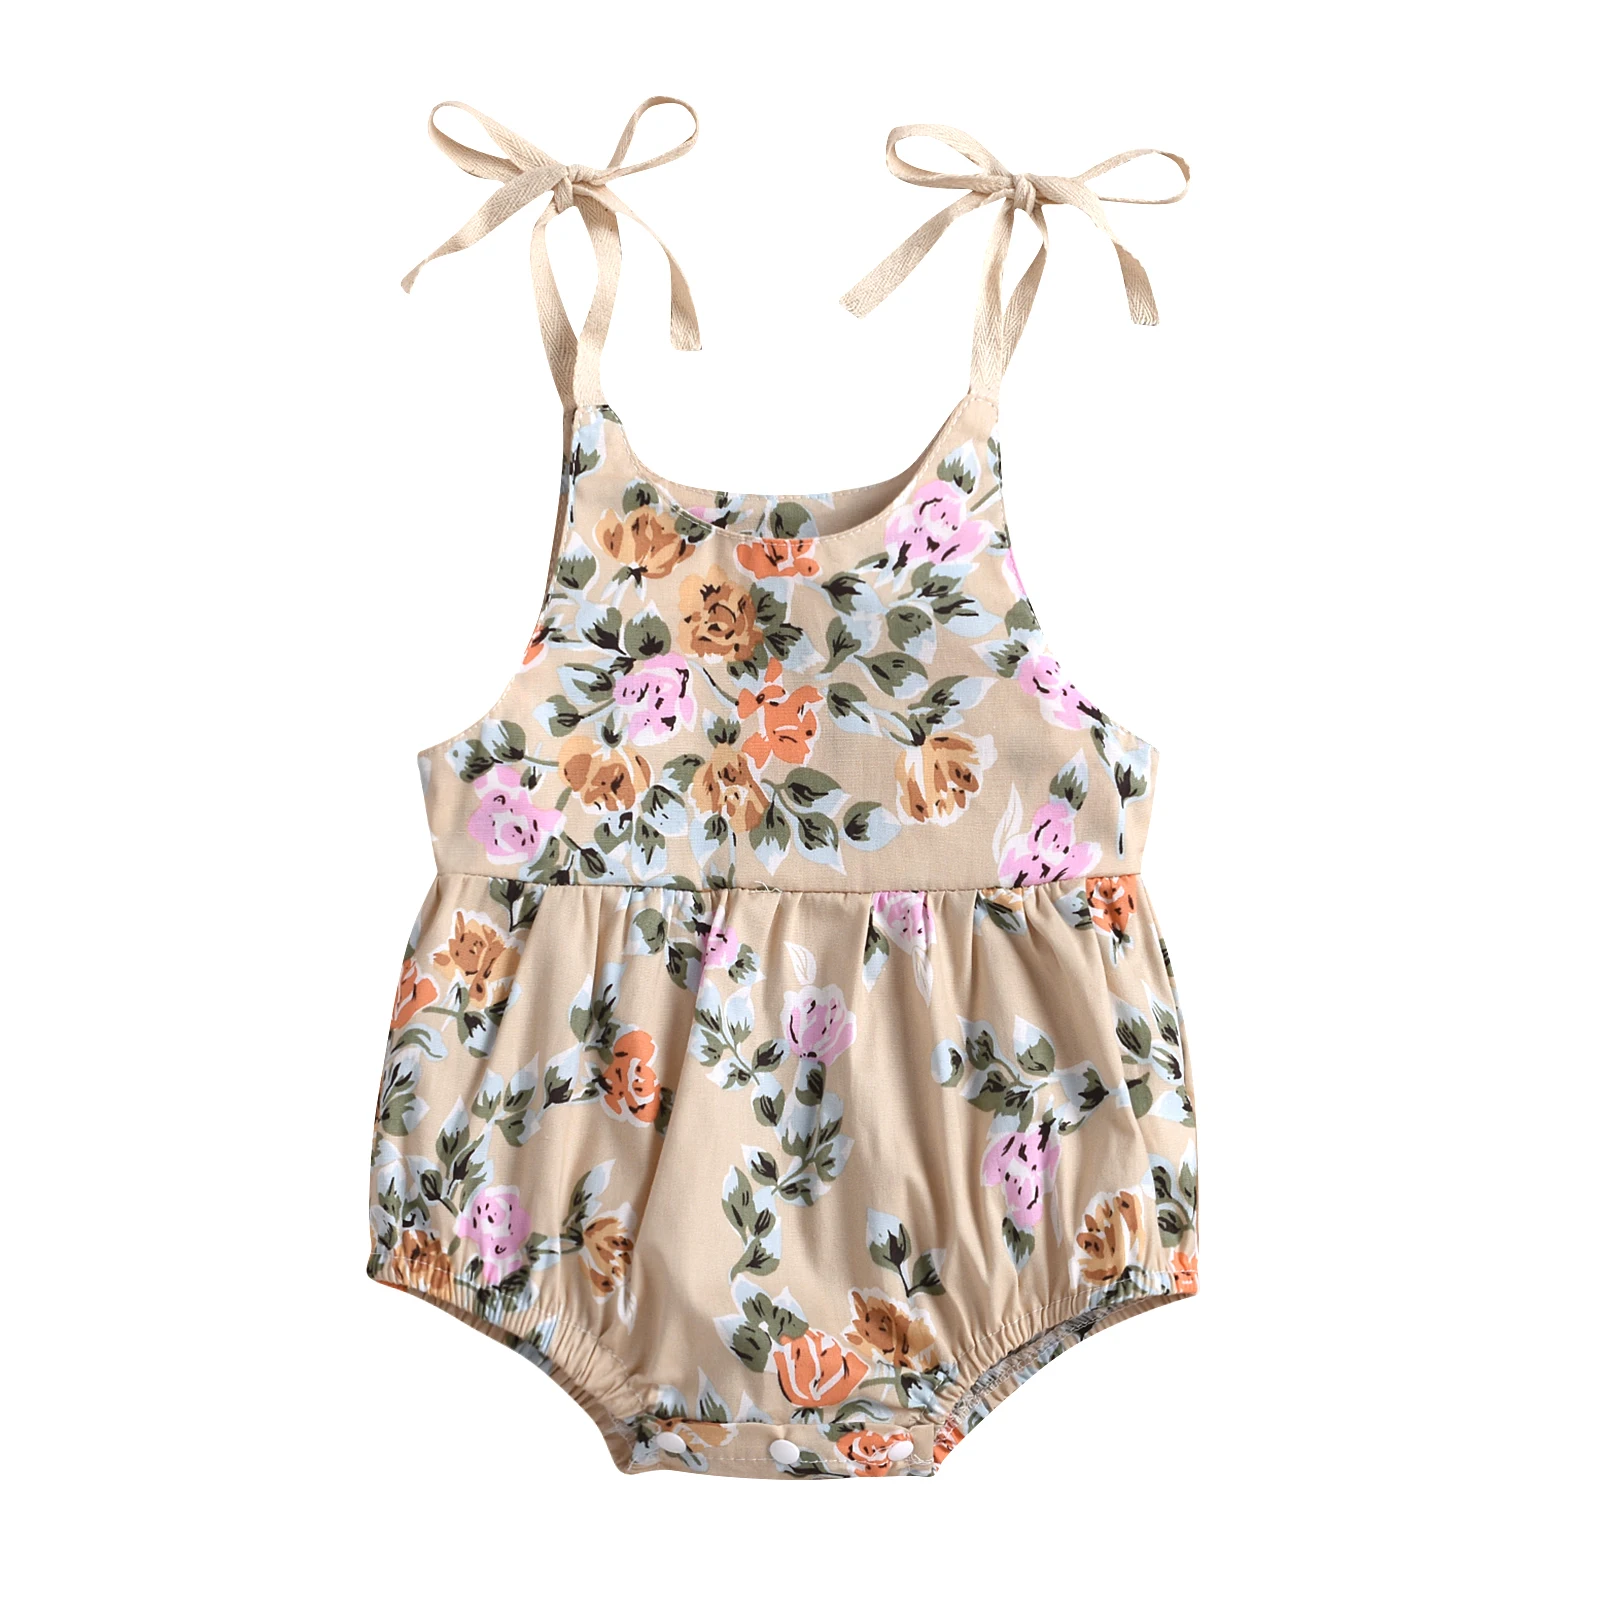 Summer Baby Girls Rompers Floral Baby Clothing Cotton Newborn Baby Clothes Infant Sleeveless Jumpsuit Clothing Baby Outfit best Baby Bodysuits Baby Rompers